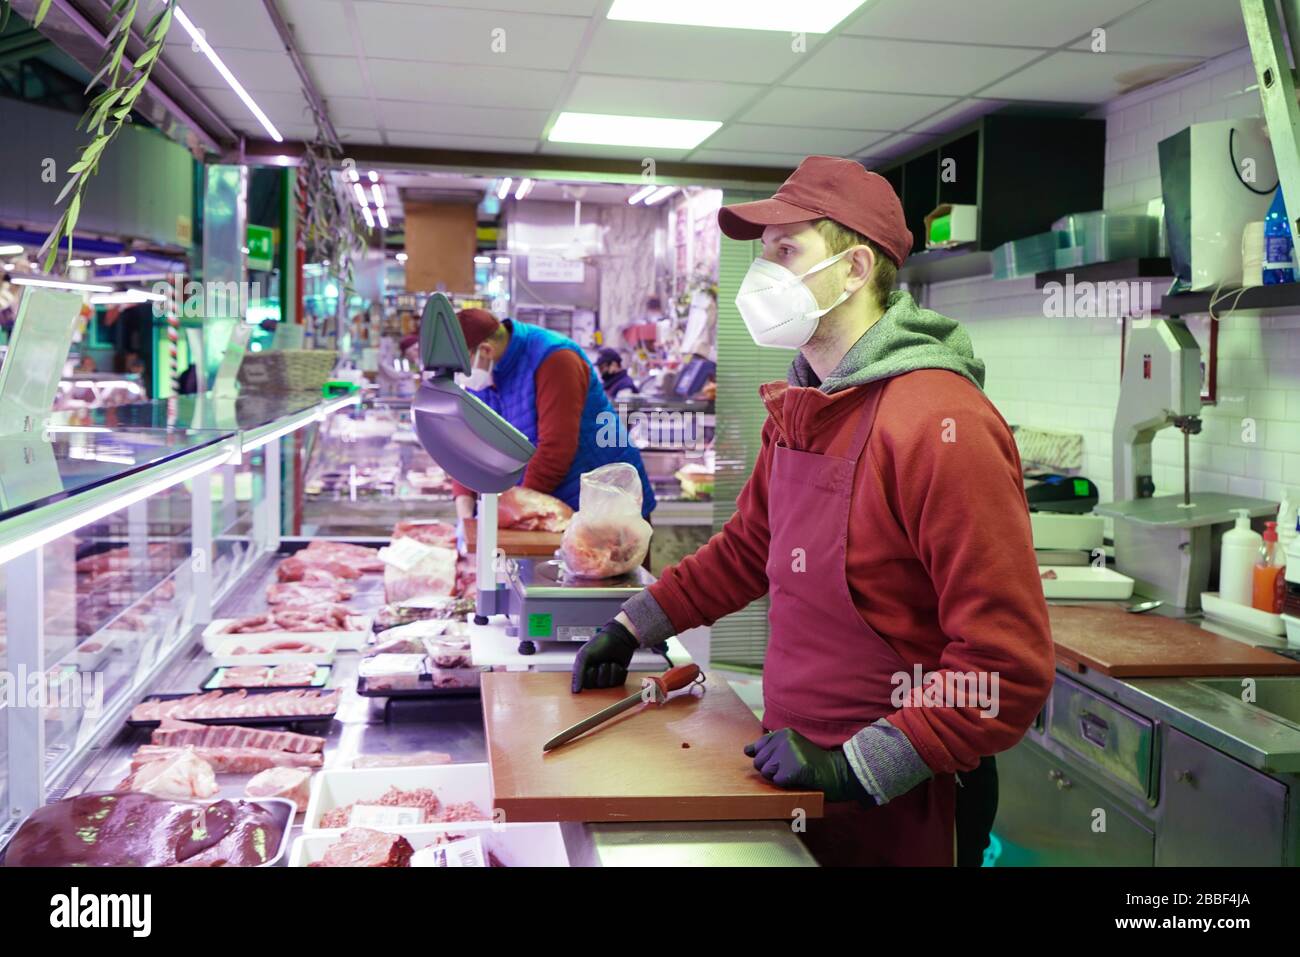 A butcher wearing a coronavirus protective mask. Turin, Italy - March 2020 Stock Photo